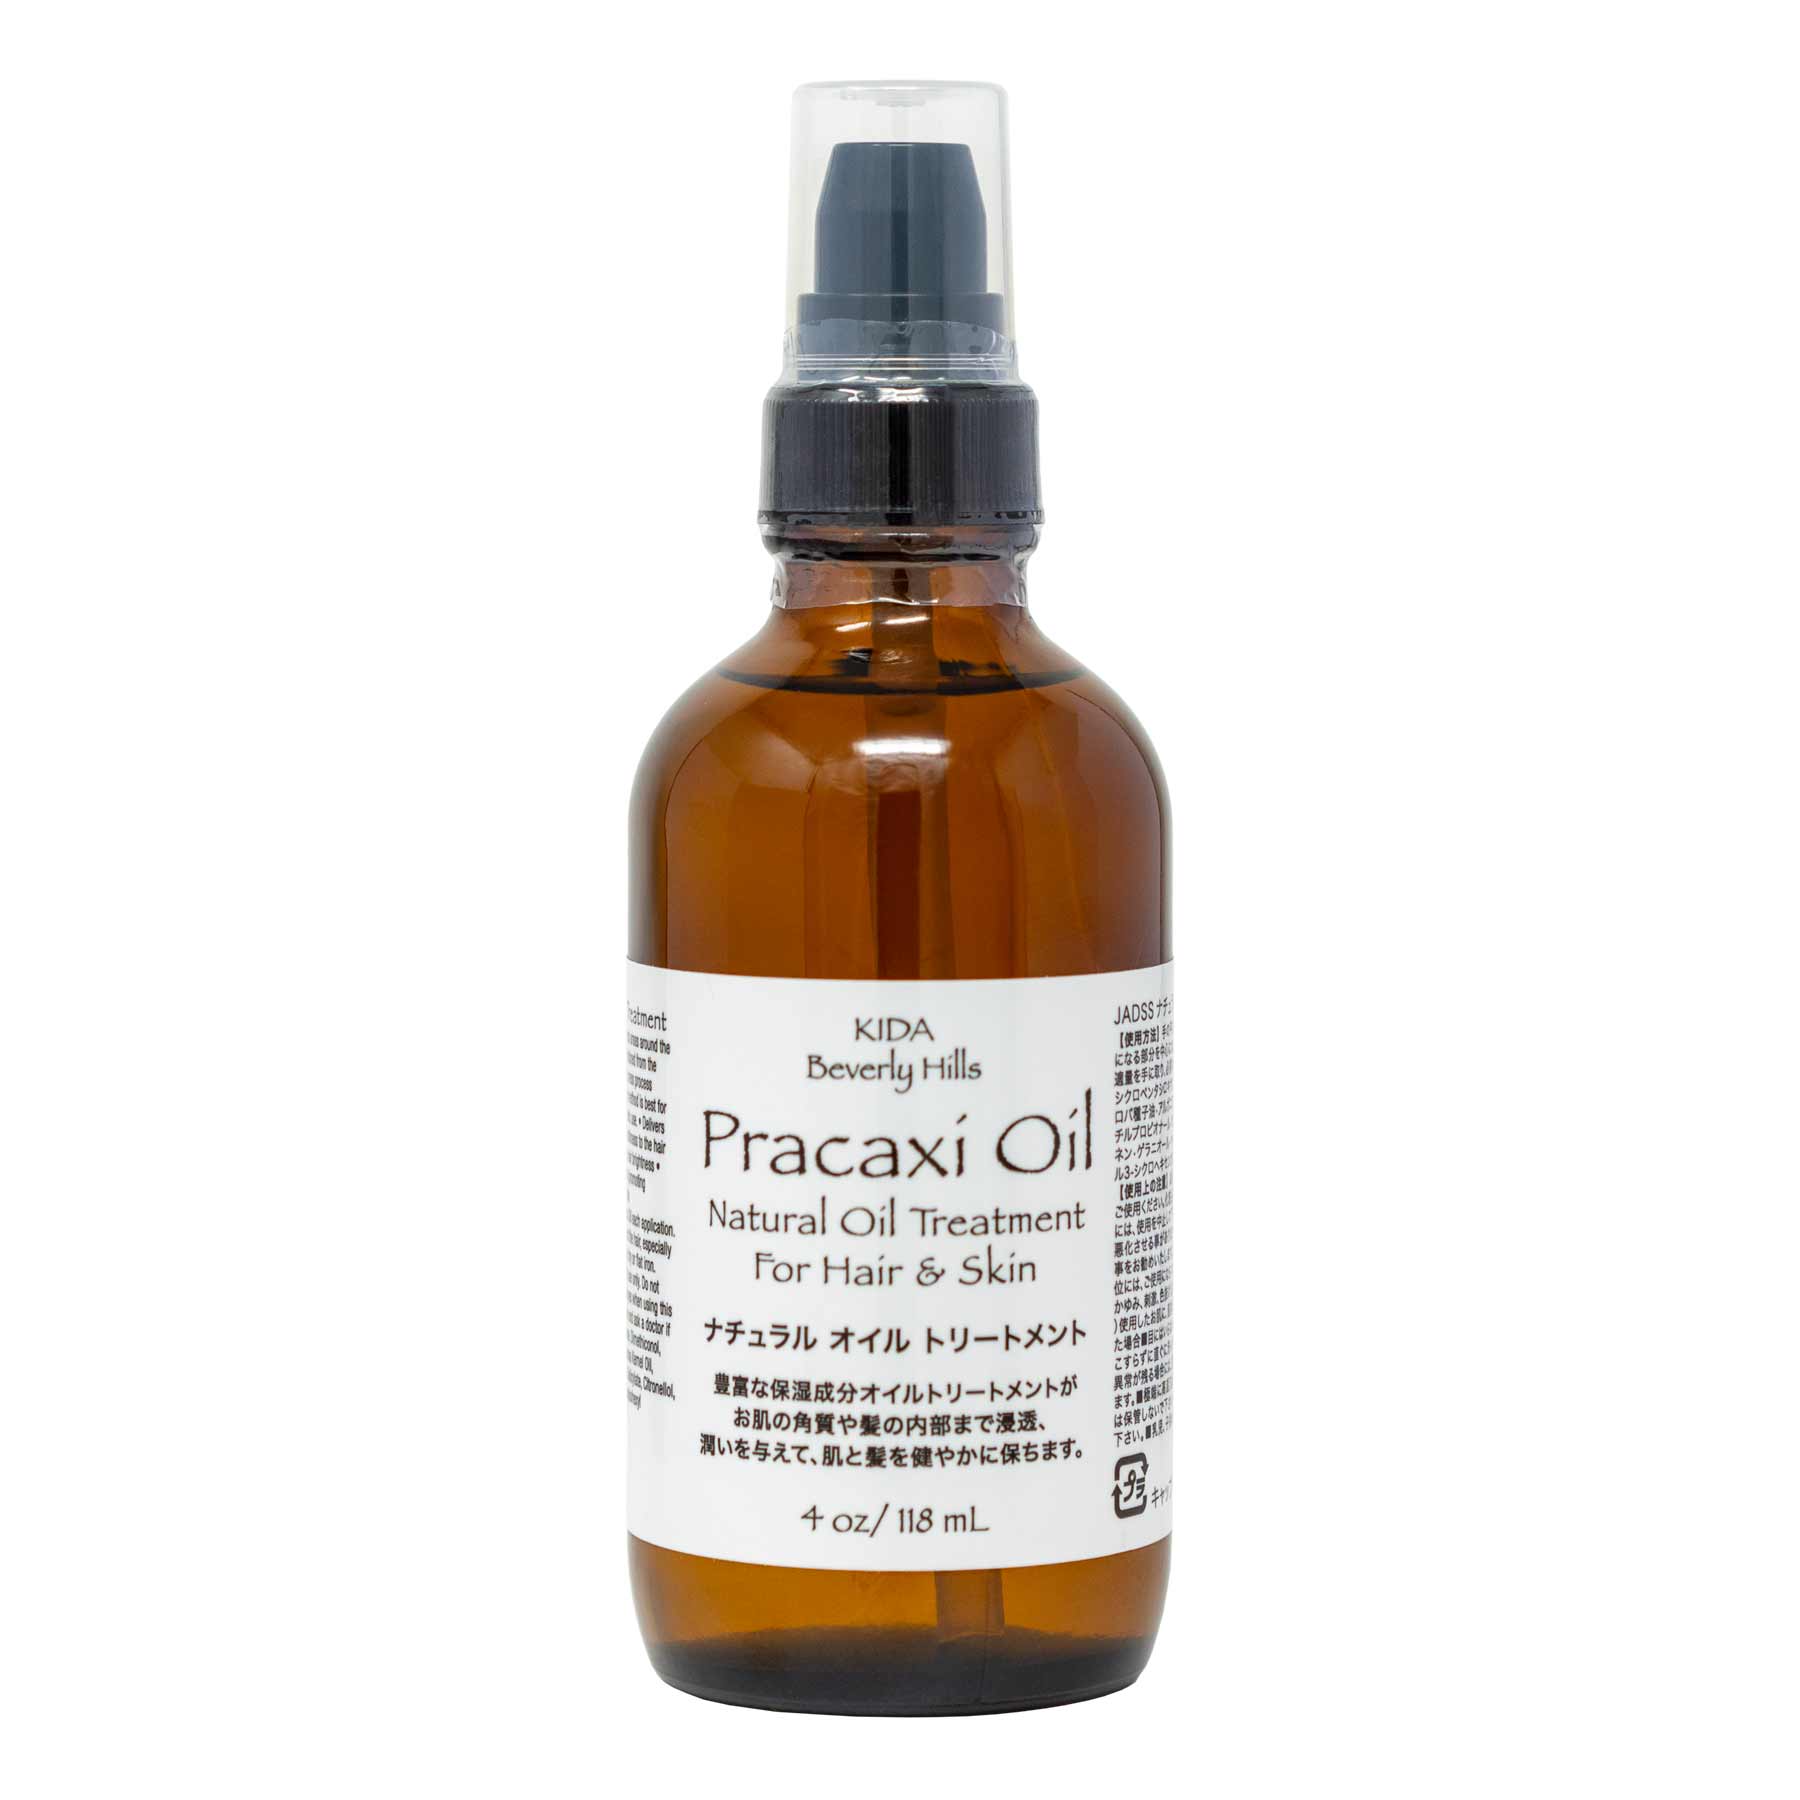 Pracaxi Oil Natural Oil Treatment for Hair and Skin